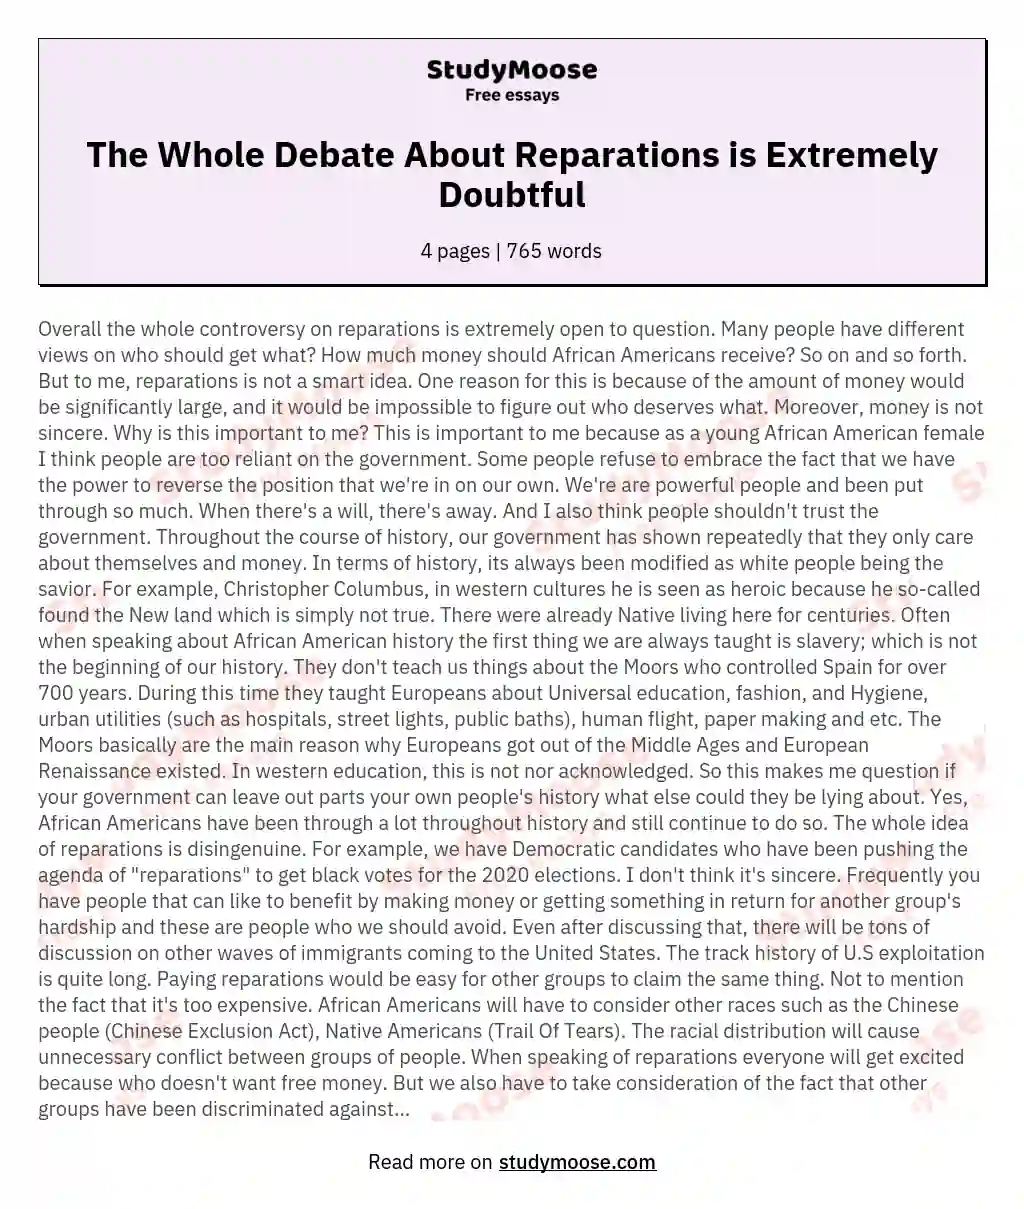 The Whole Debate About Reparations is Extremely Doubtful essay